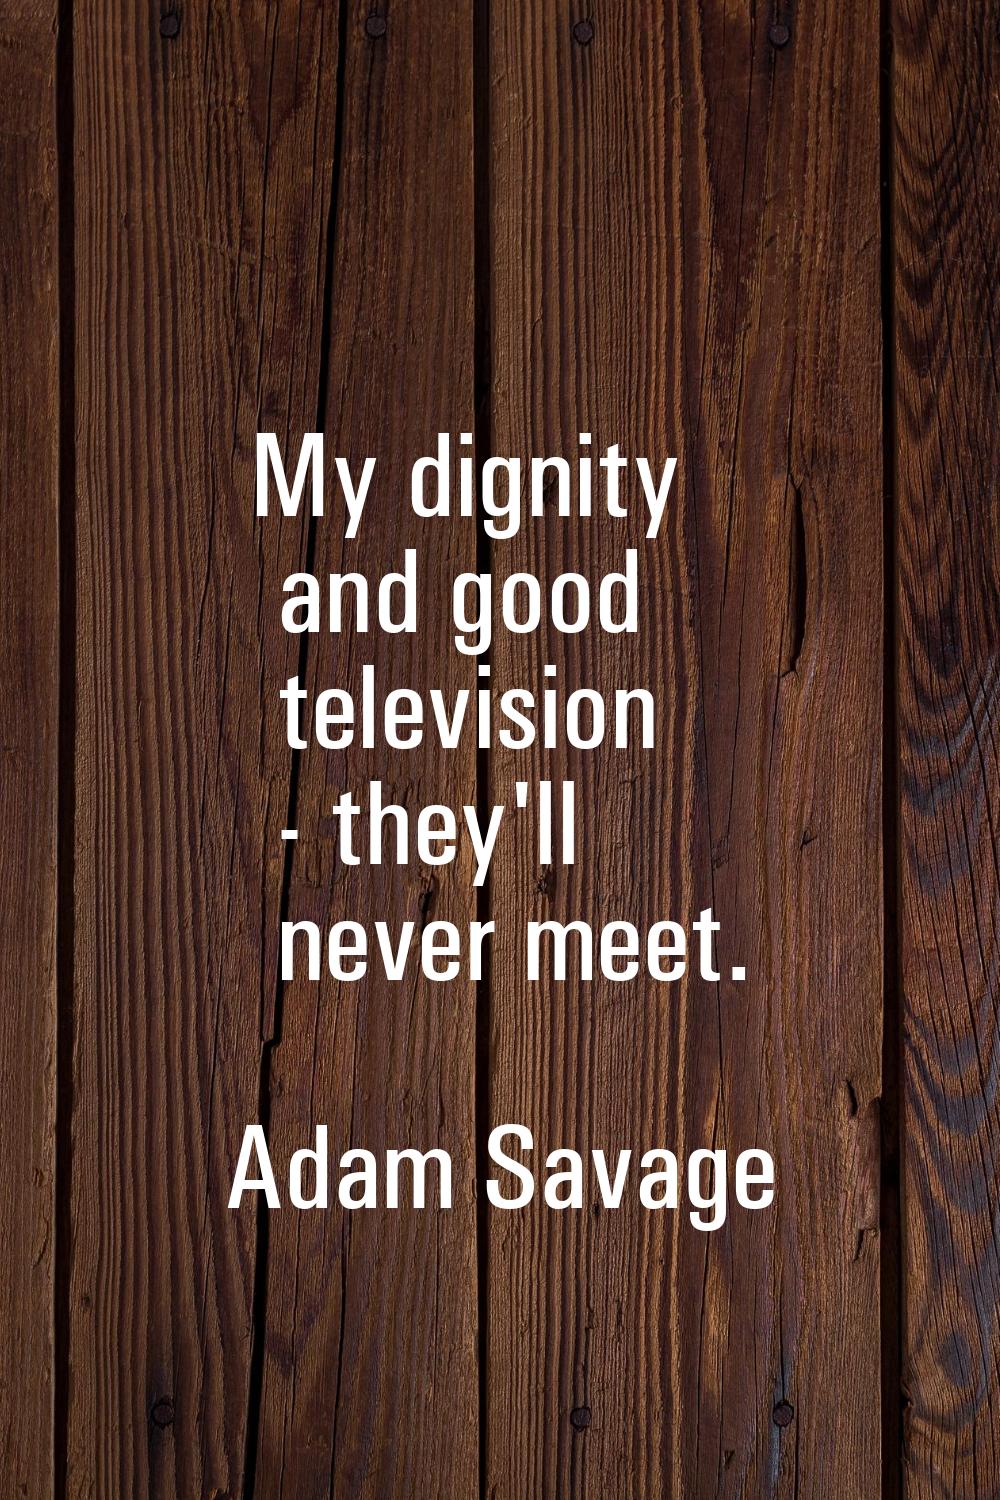 My dignity and good television - they'll never meet.